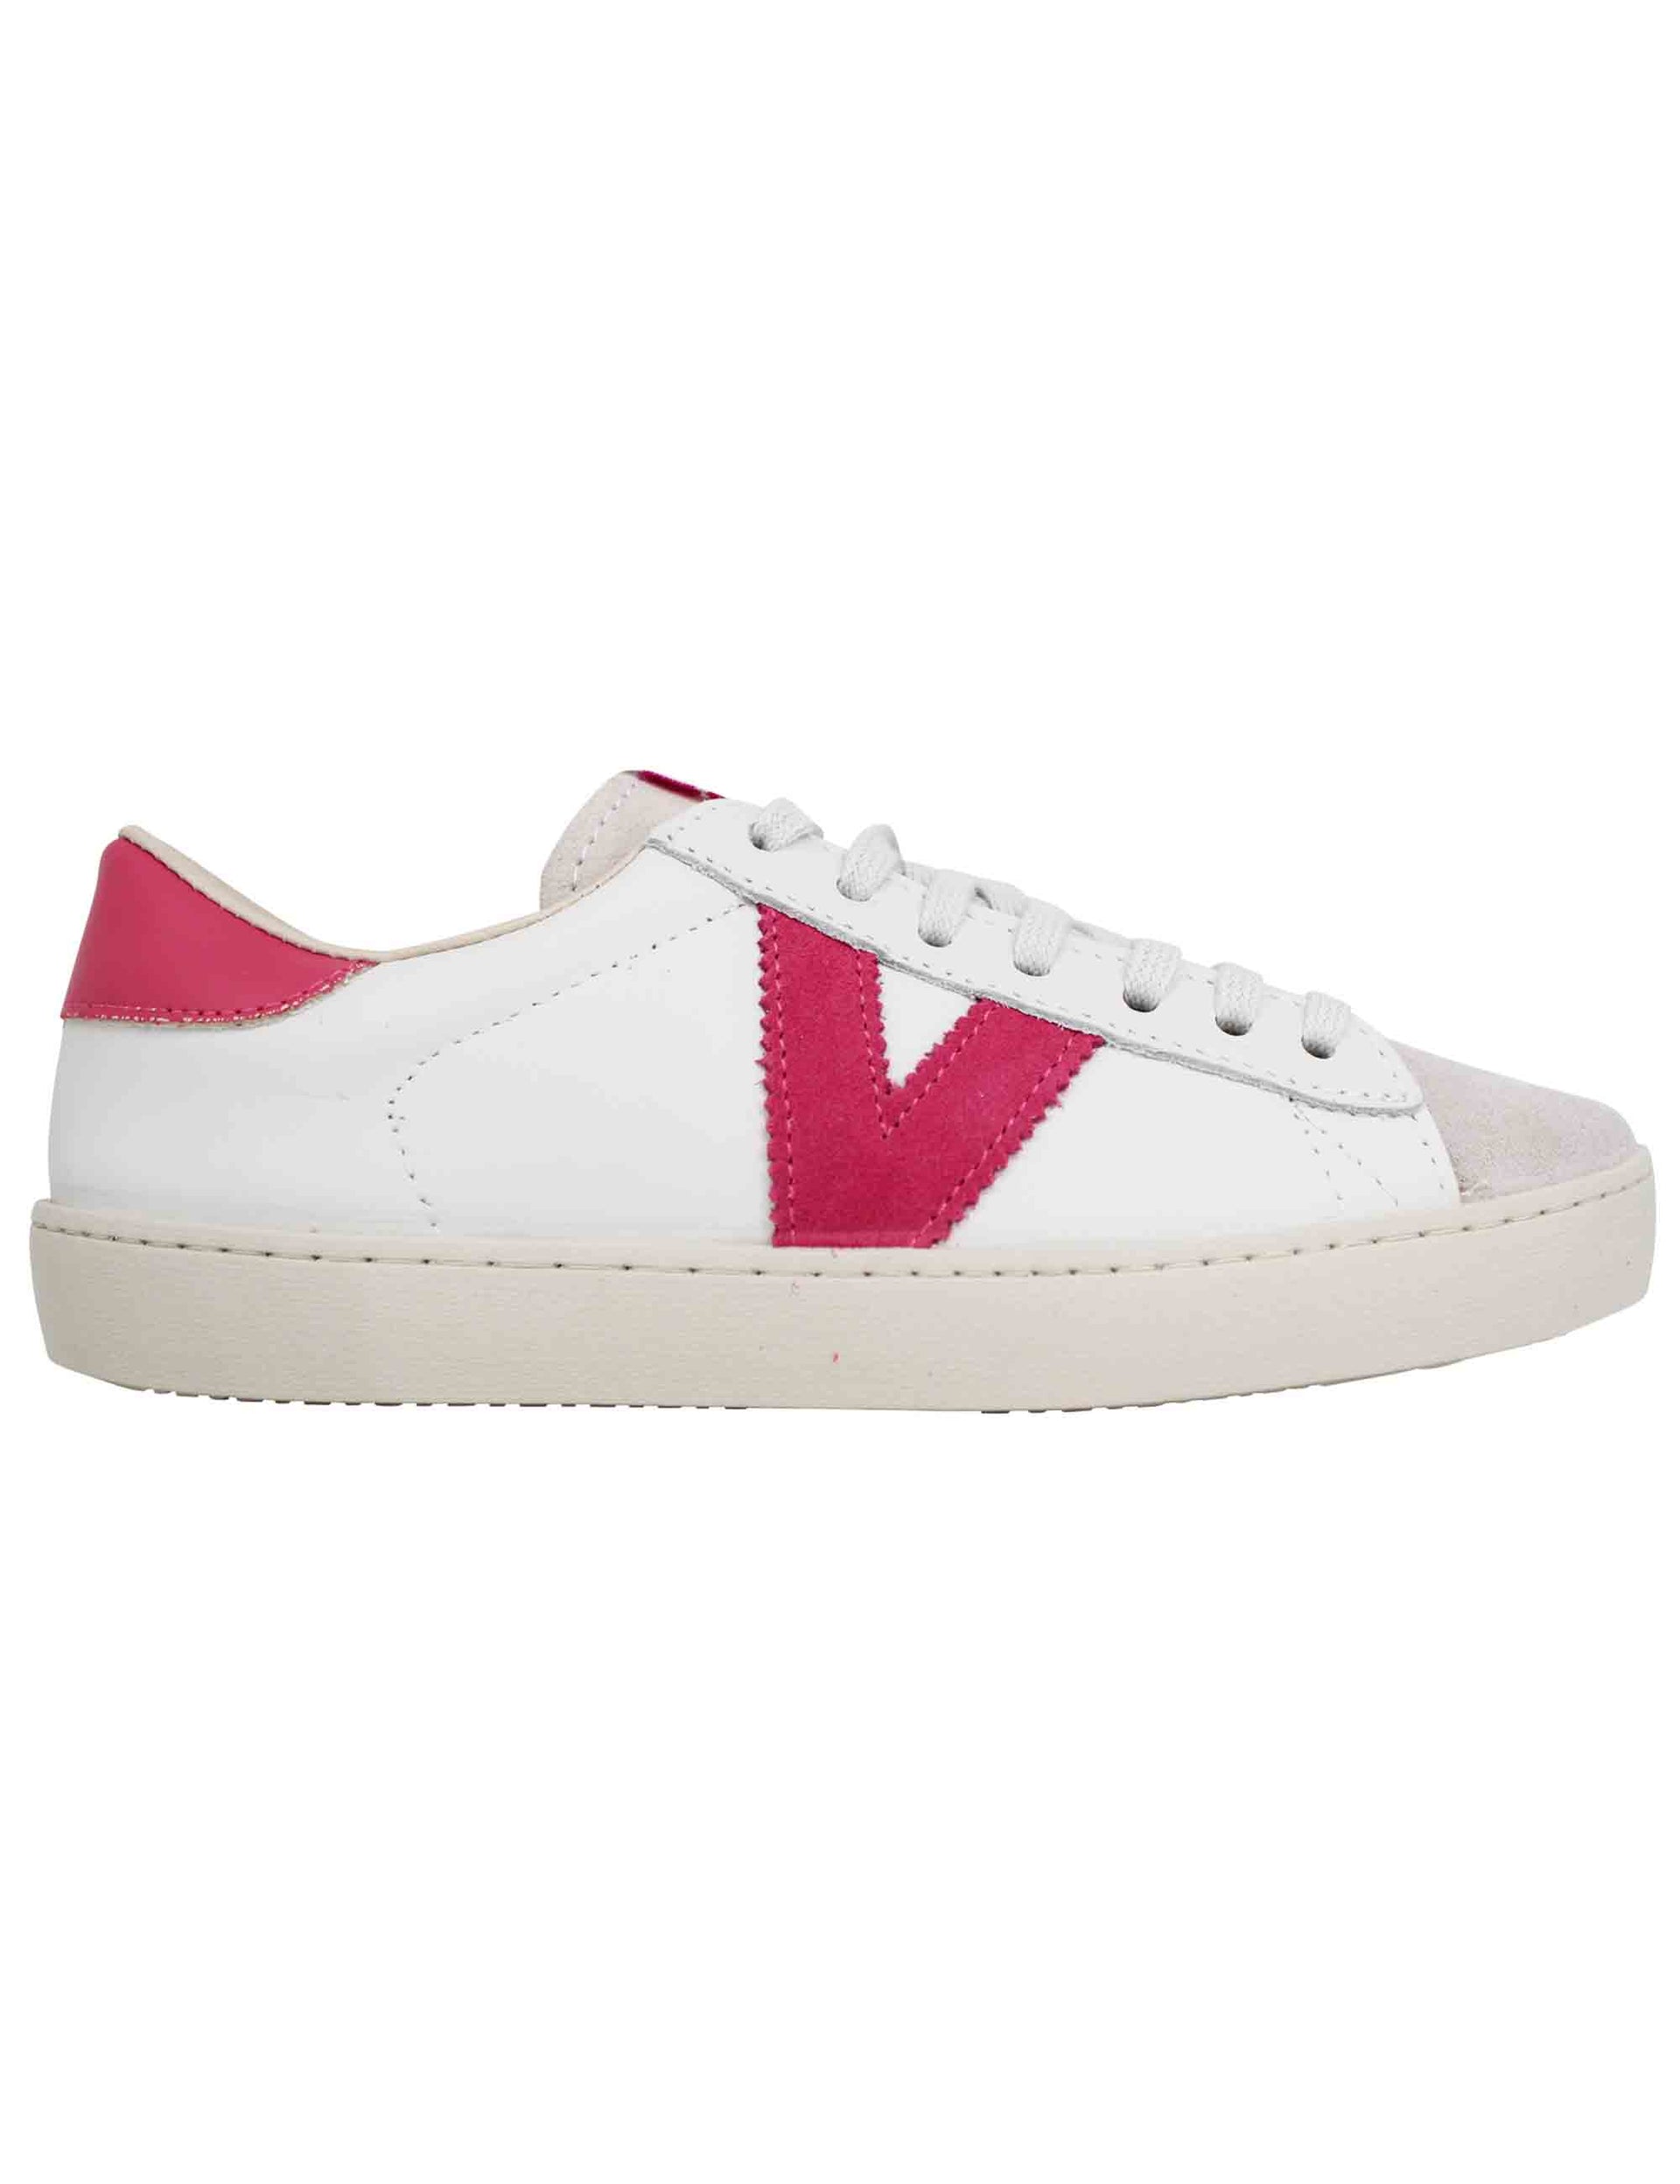 Women's sneakers in white leather with fuchsia inserts